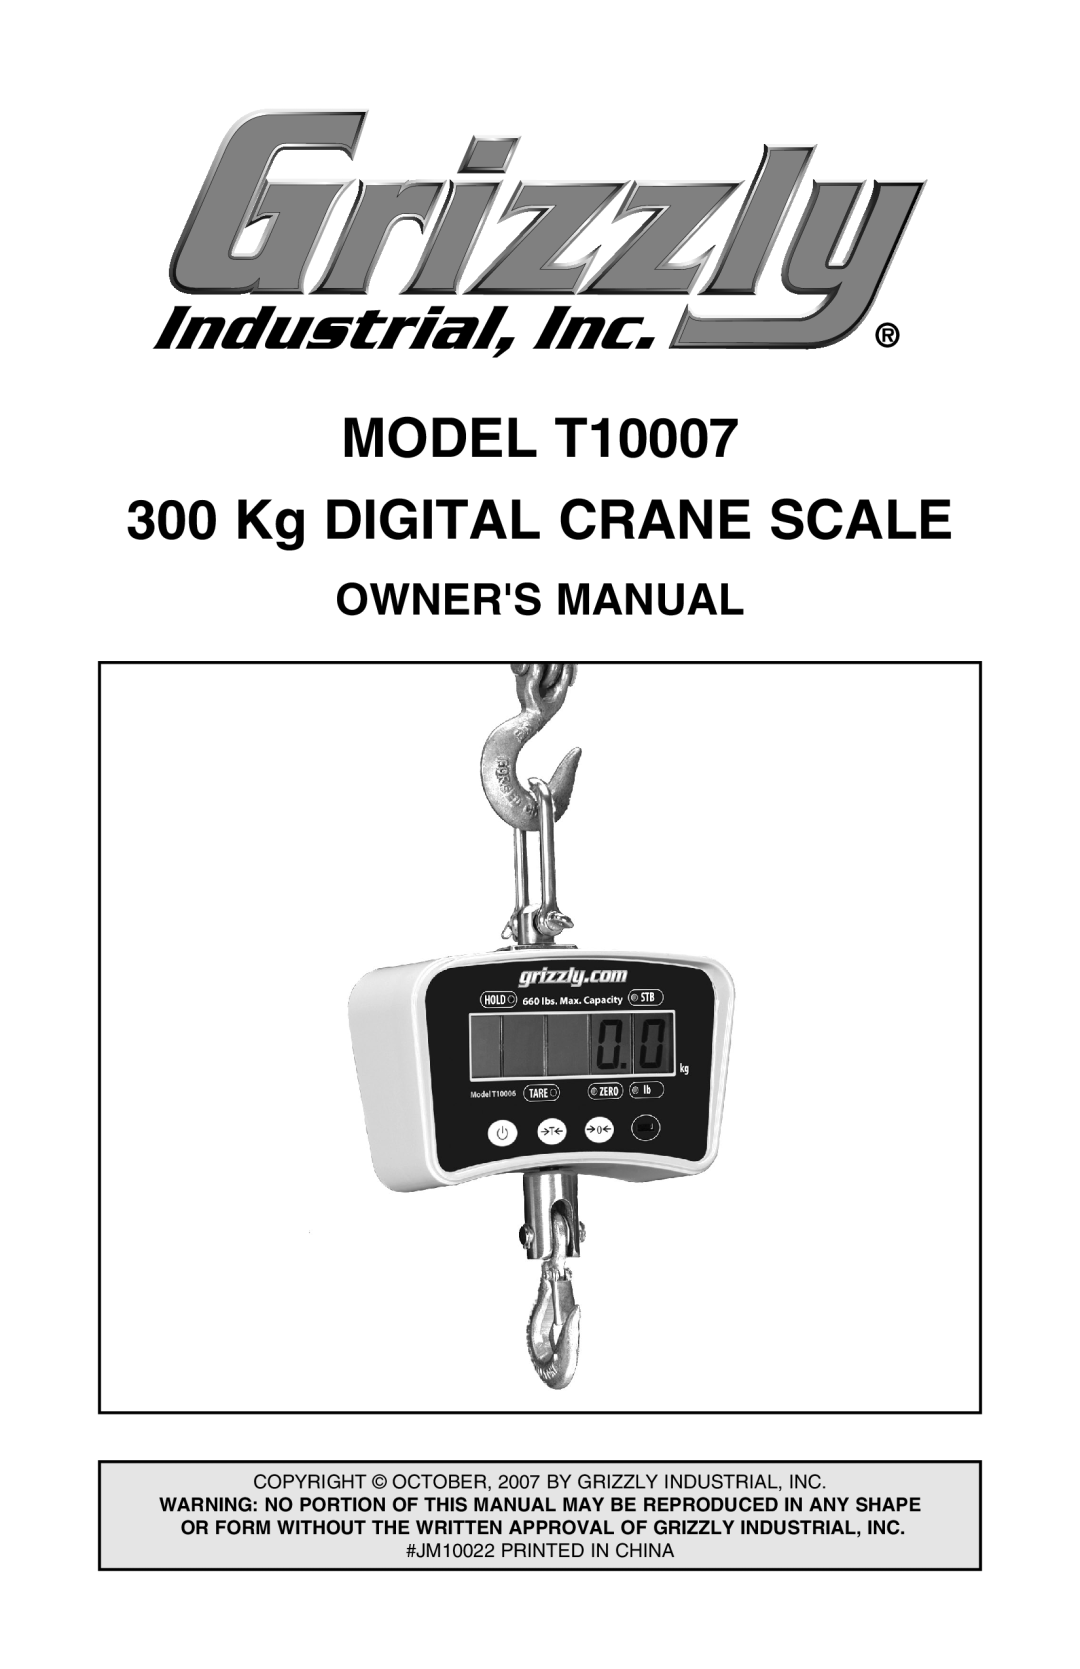 Grizzly owner manual MODEL T10007 300 Kg DIGITAL CRANE SCALE, Owners Manual 